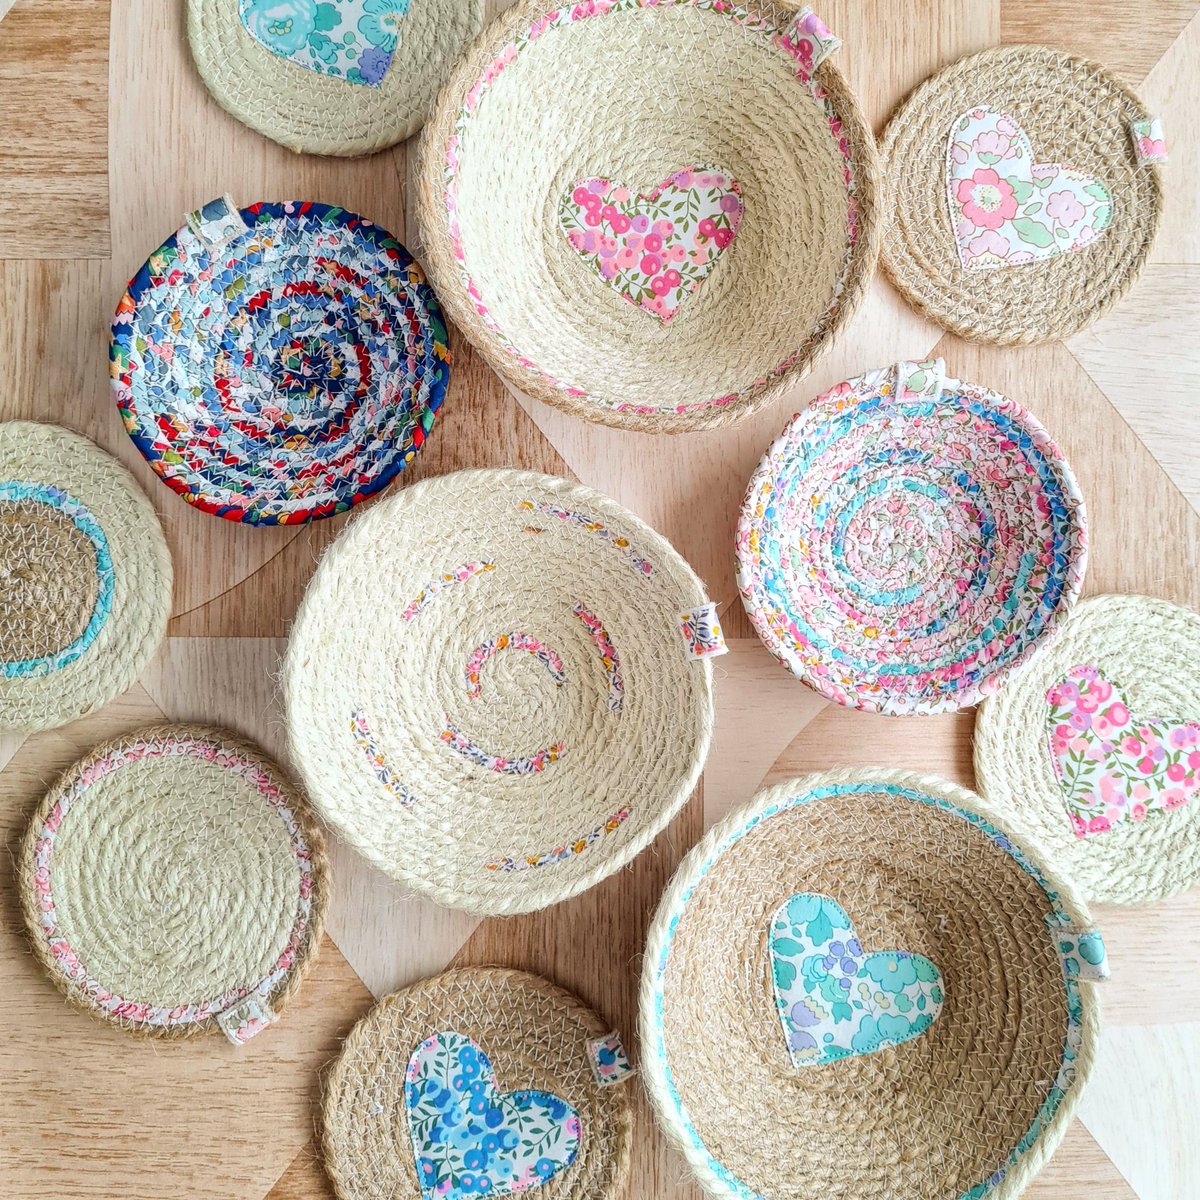 Handmade rope baskets, coasters & trinket bowls made from sustainable jute rope with pretty Liberty fabric trim #UKGiftHour #UKGiftAM #handmade #basket #homedecor #giftideas